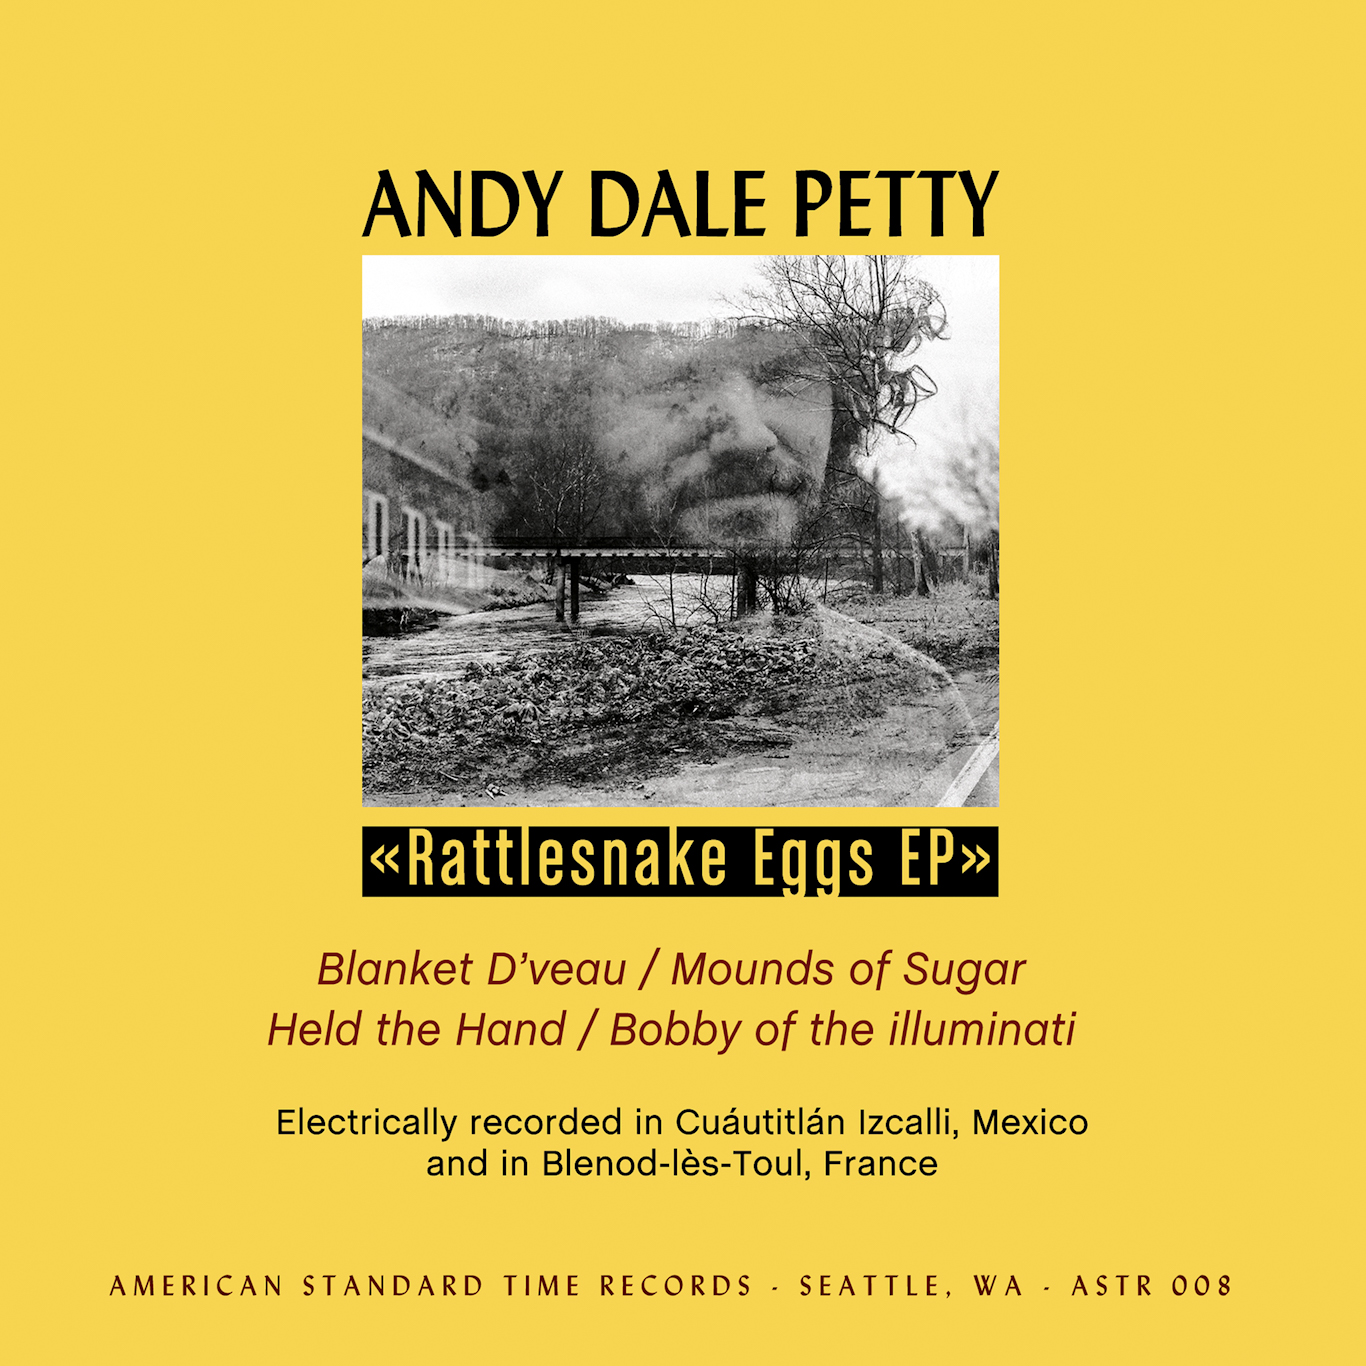 REVIEW: Andy Dale Petty – Rattlesnake Eggs EP 